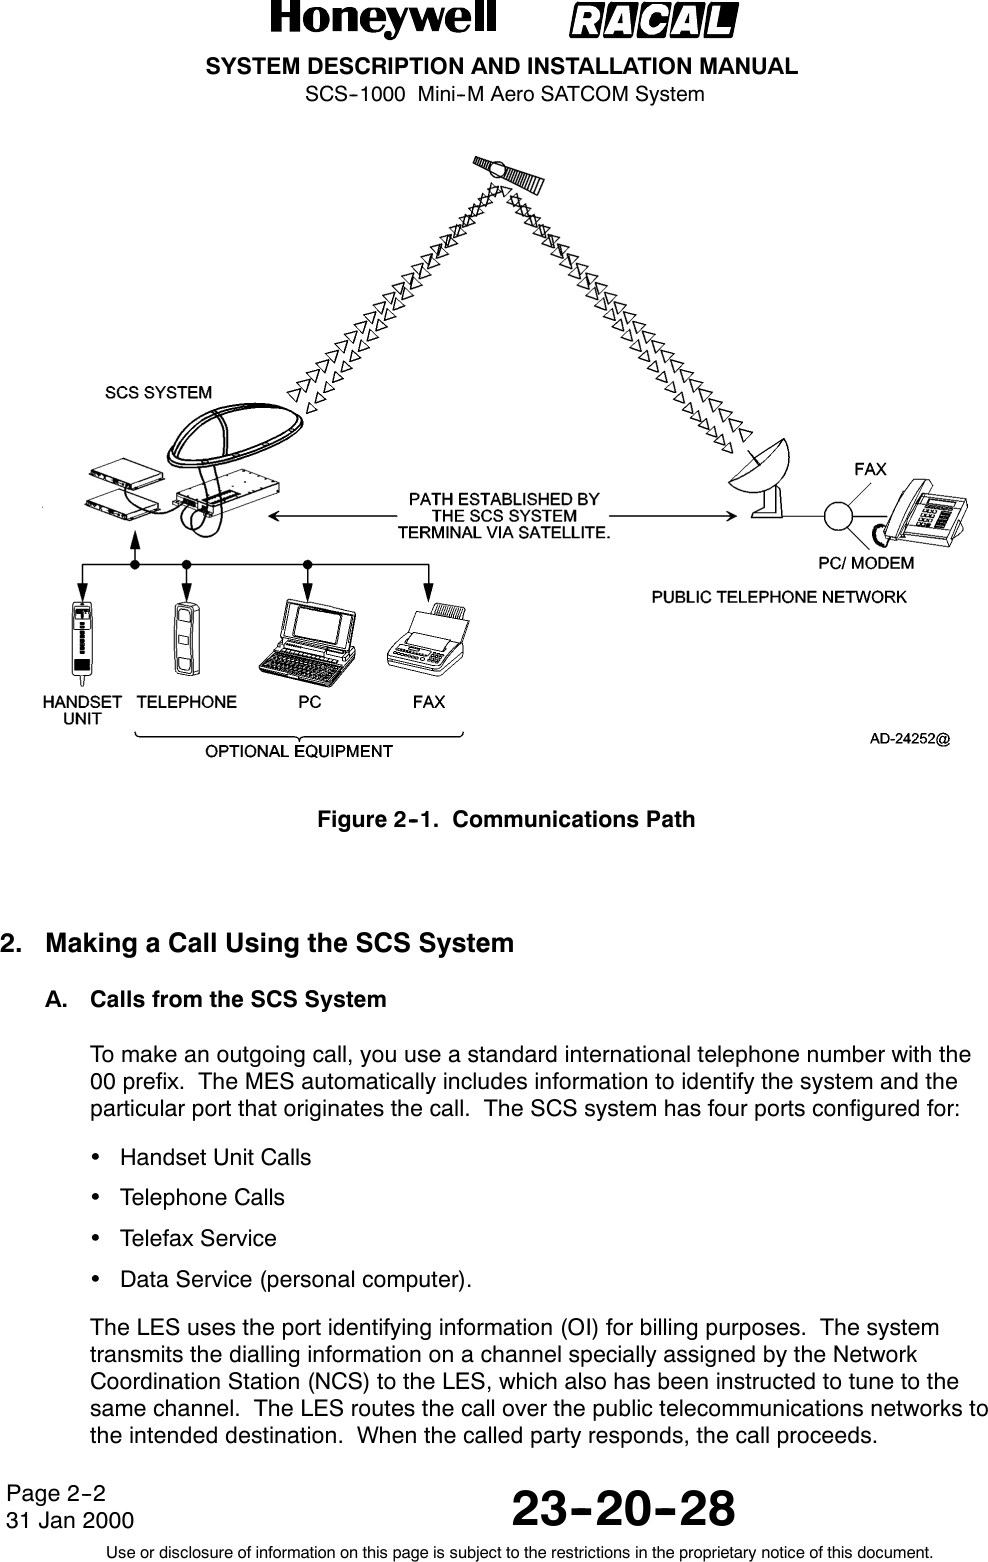 SYSTEM DESCRIPTION AND INSTALLATION MANUALSCS--1000 Mini--M Aero SATCOM System23--20--28Use or disclosure of information on this page is subject to the restrictions in the proprietary notice of this document.Page 2--231 Jan 2000Figure 2--1. Communications Path2. Making a Call Using the SCS SystemA. Calls from the SCS SystemTo make an outgoing call, you use a standard international telephone number with the00 prefix. The MES automatically includes information to identify the system and theparticular port that originates the call. The SCS system has four ports configured for:Handset Unit CallsTelephone CallsTelefax ServiceData Service (personal computer).The LES uses the port identifying information (OI) for billing purposes. The systemtransmits the dialling information on a channel specially assigned by the NetworkCoordination Station (NCS) to the LES, which also has been instructed to tune to thesame channel. The LES routes the call over the public telecommunications networks tothe intended destination. When the called party responds, the call proceeds.